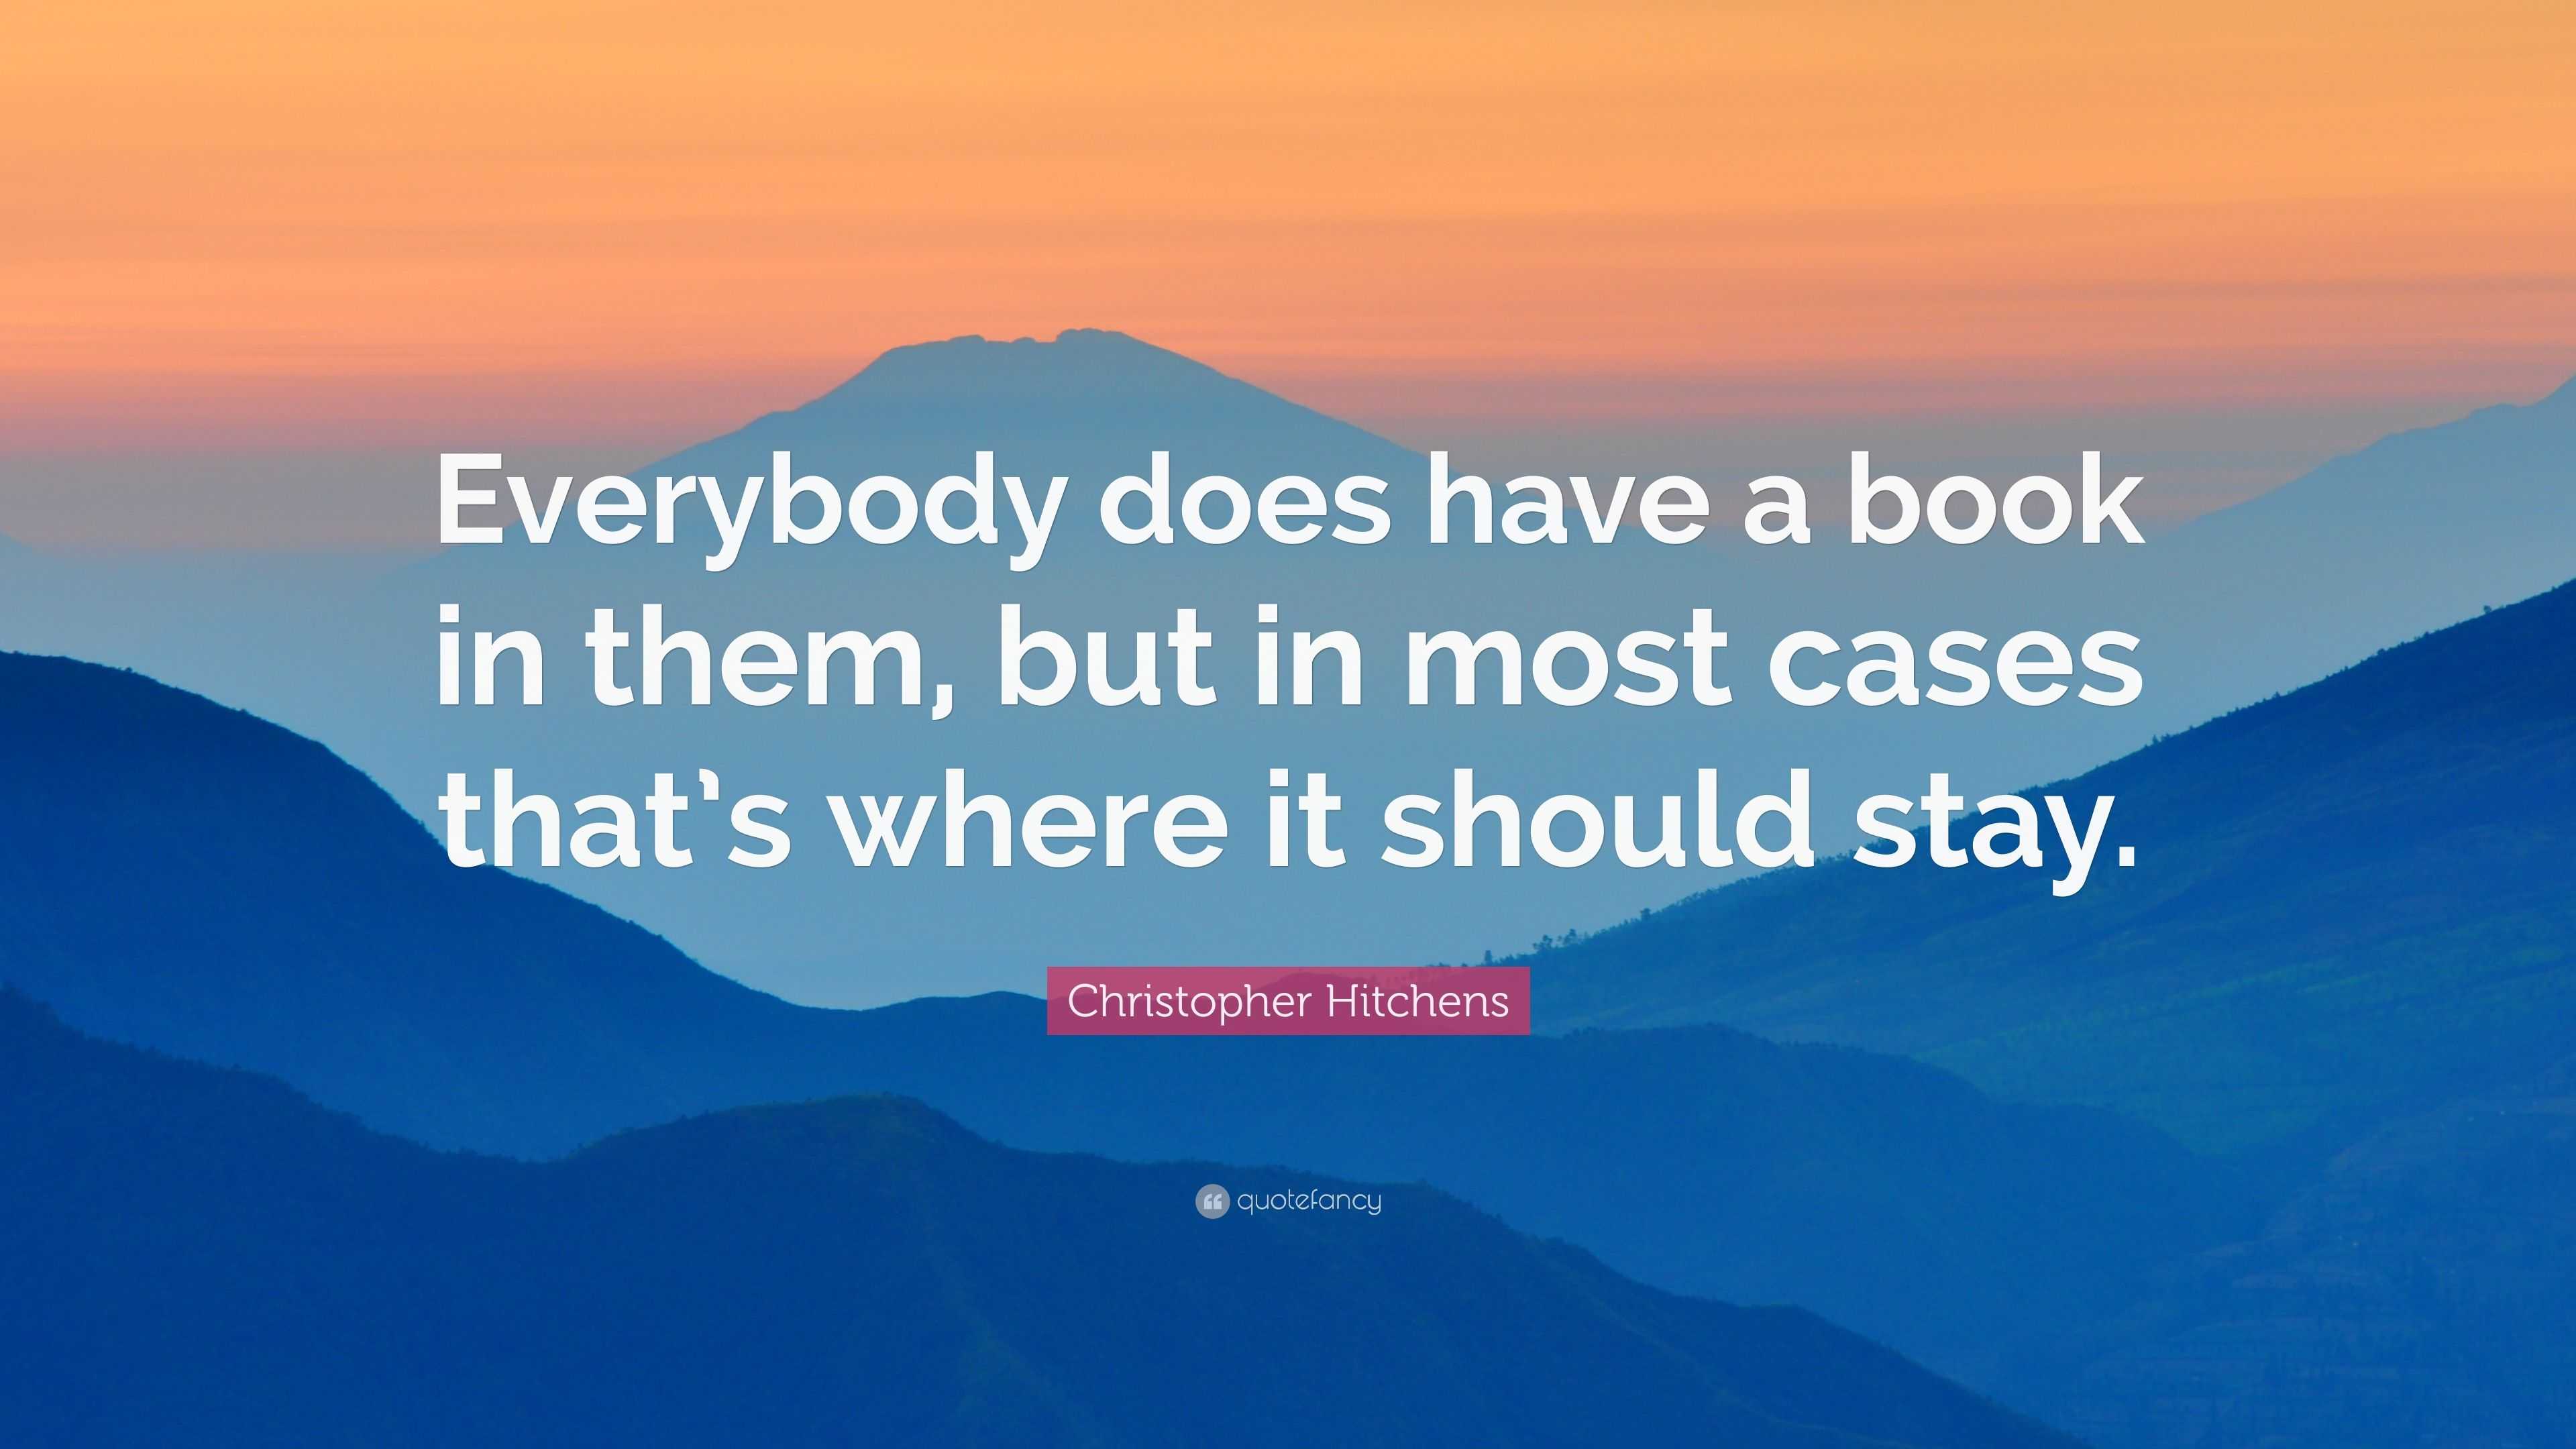 Christopher Hitchens Quote: “Everybody does have a book in them, but in ...